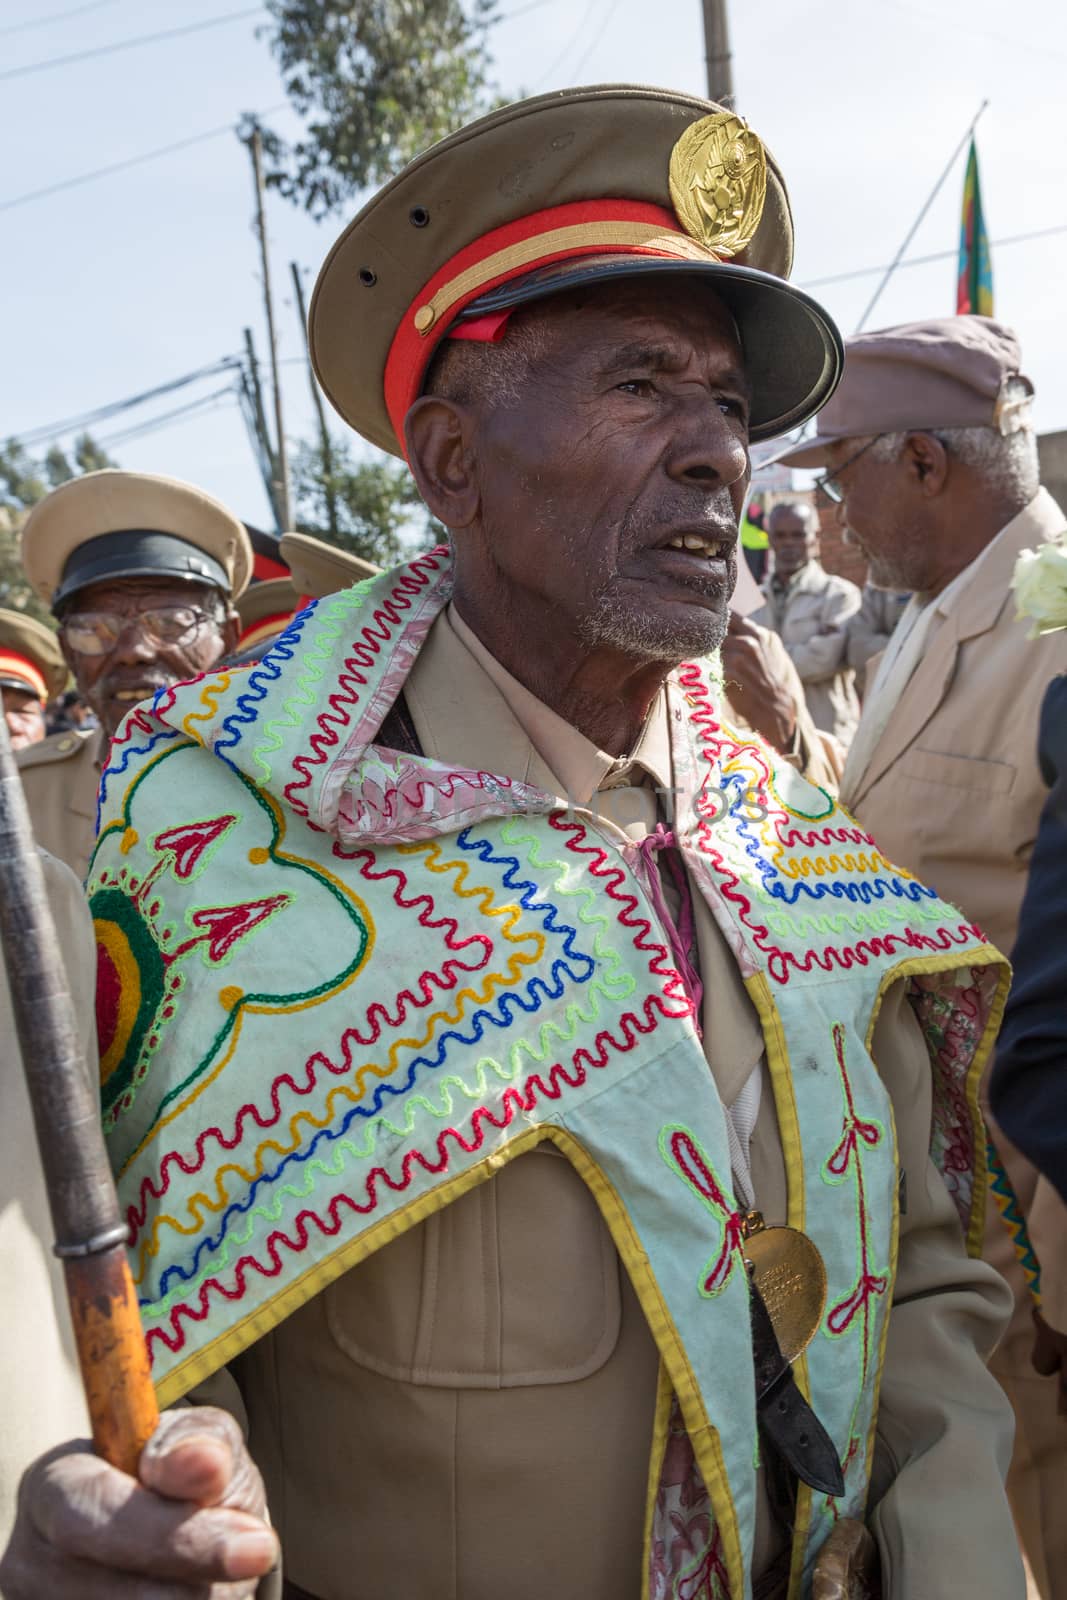 Addis Ababa - Sept 2: A decorated war veteran attends the celebrations of the 119th Anniversary of the Ethiopian Army's victory over the invading Italian forces in the 1896 battle of Adwa. September 2, 2015, Addis Ababa, Ethiopia.